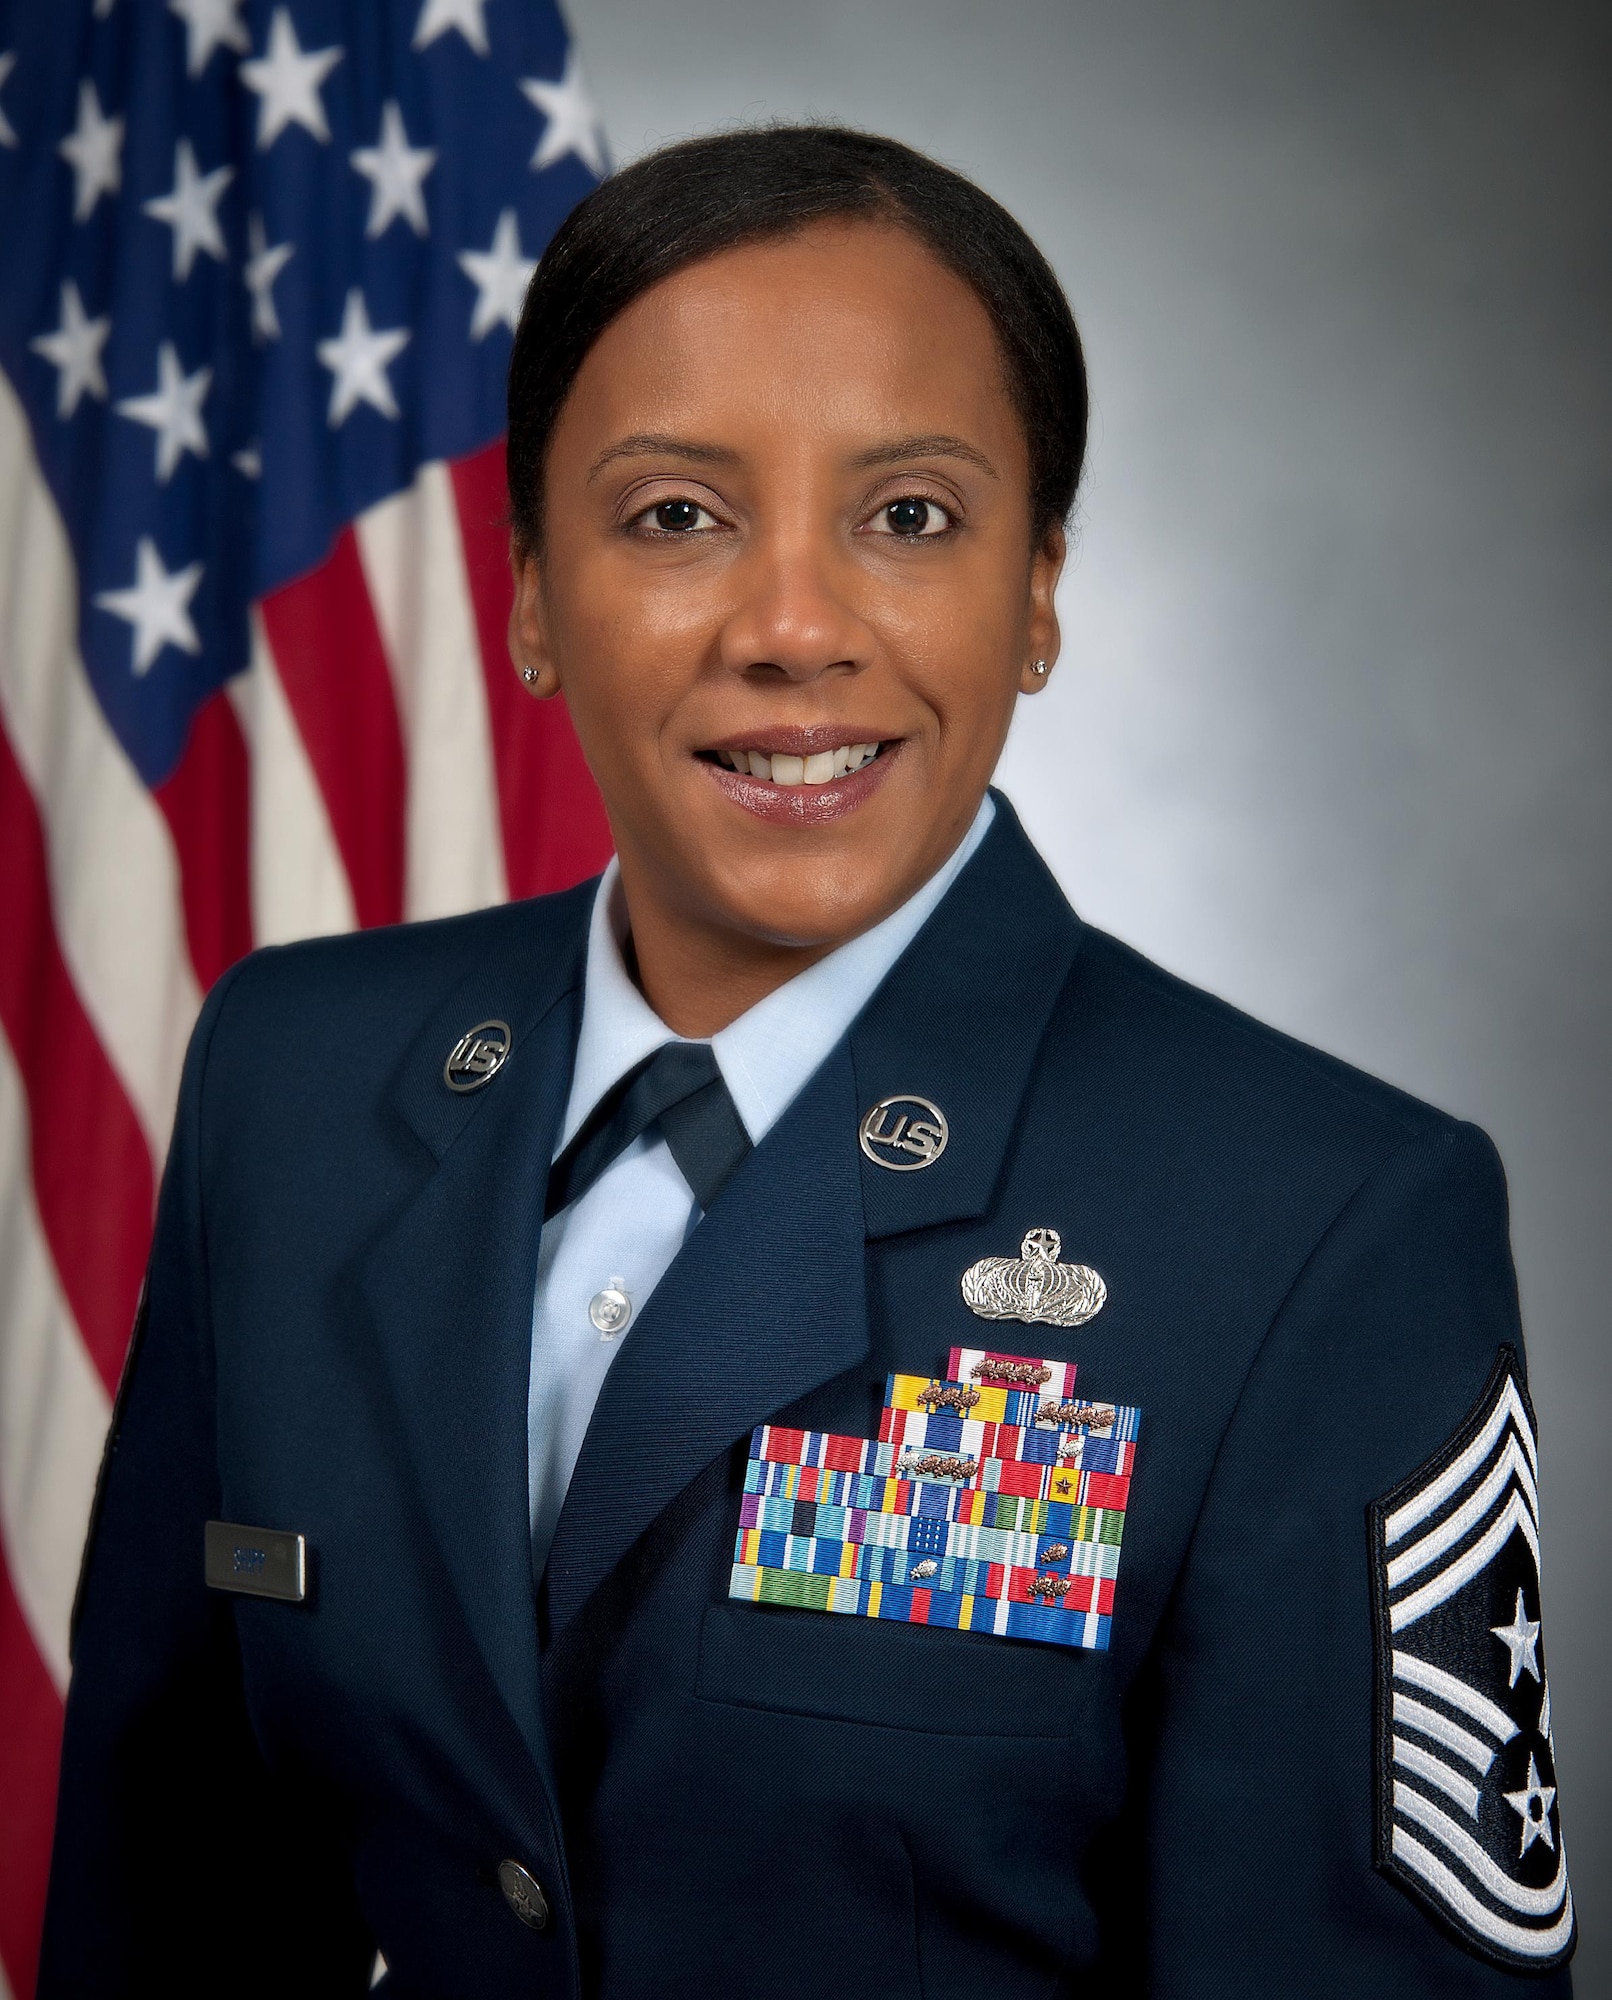 Chief Master Sgt. Erica Shipp took her seat as the Maxwell Air Force Base-Gunter Annex command chief master sergeant Dec. 14, 2016